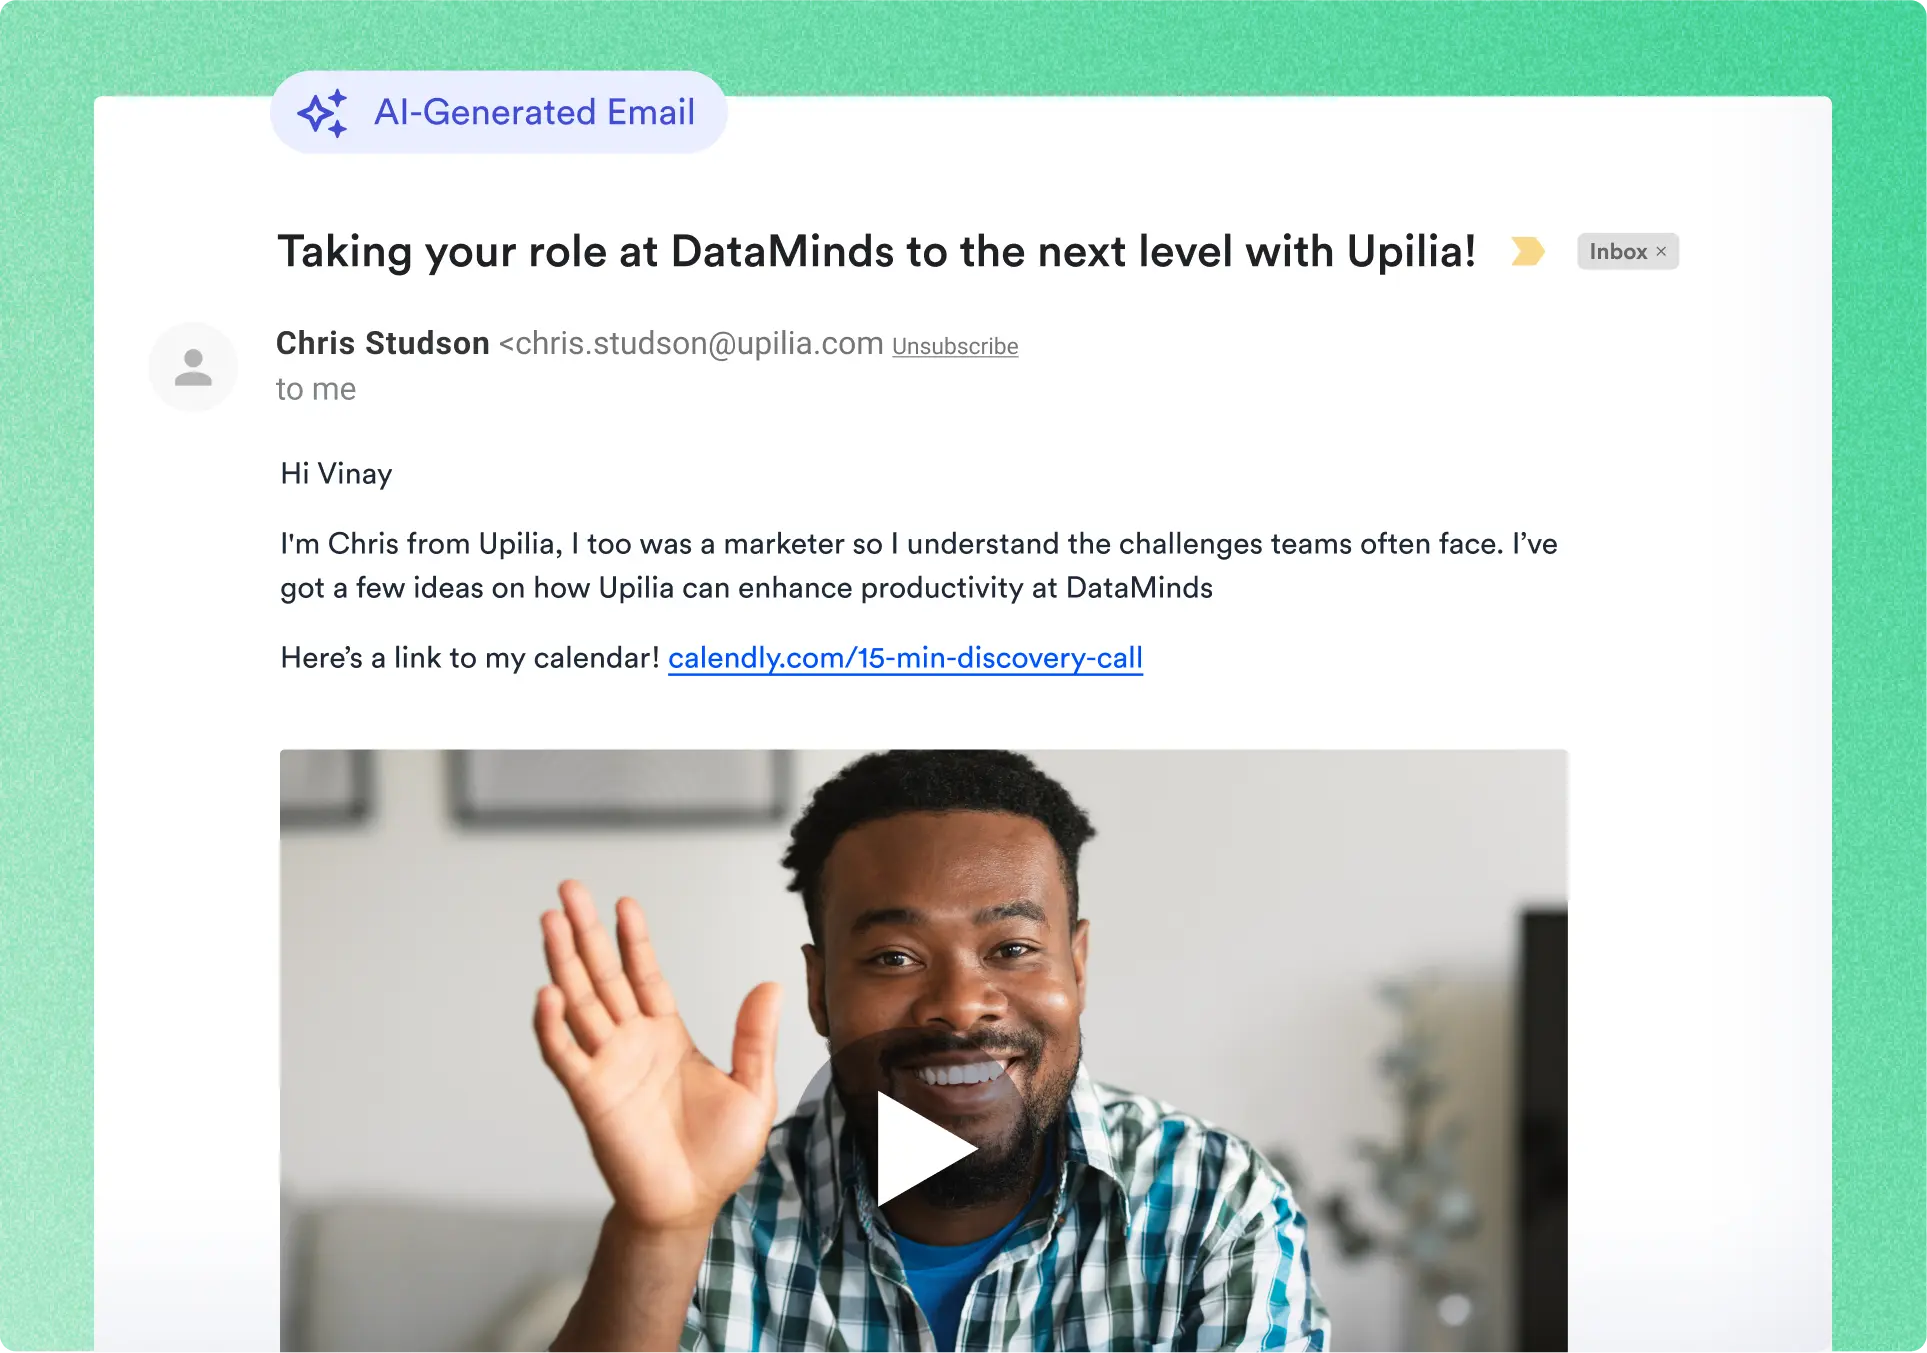 A screenshot of an email. The email is from a salesperson at a company called Upilia, reaching out to a prospective client. The email includes a link to the salesperson’s meeting calendar and a video that features a smiling, waving man in the thumbnail.